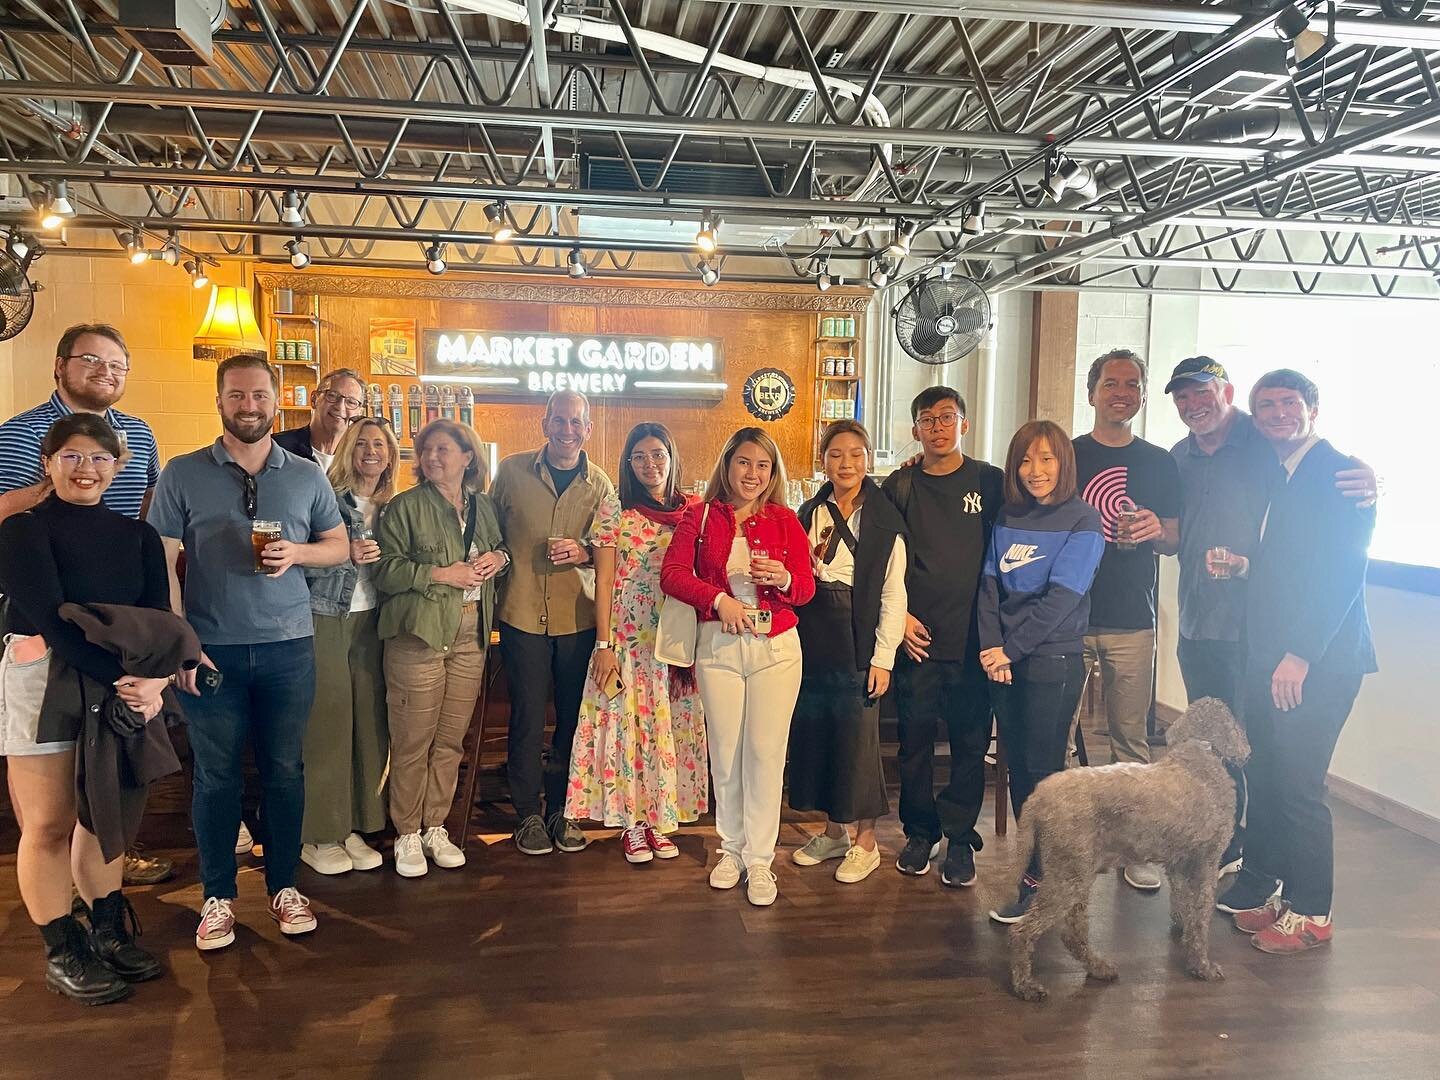 Thank you to Councilman @KerryPMcCormack, County Councilman Martin Sweeney, @Global.Cleveland, &amp; @YSEALI_Official for joining us on a Brewery Tour and lunch at @MarketGardenBrewpub! Cheers &amp; beers friends! 🍻

#marketgardenbrewery #beerforpeo